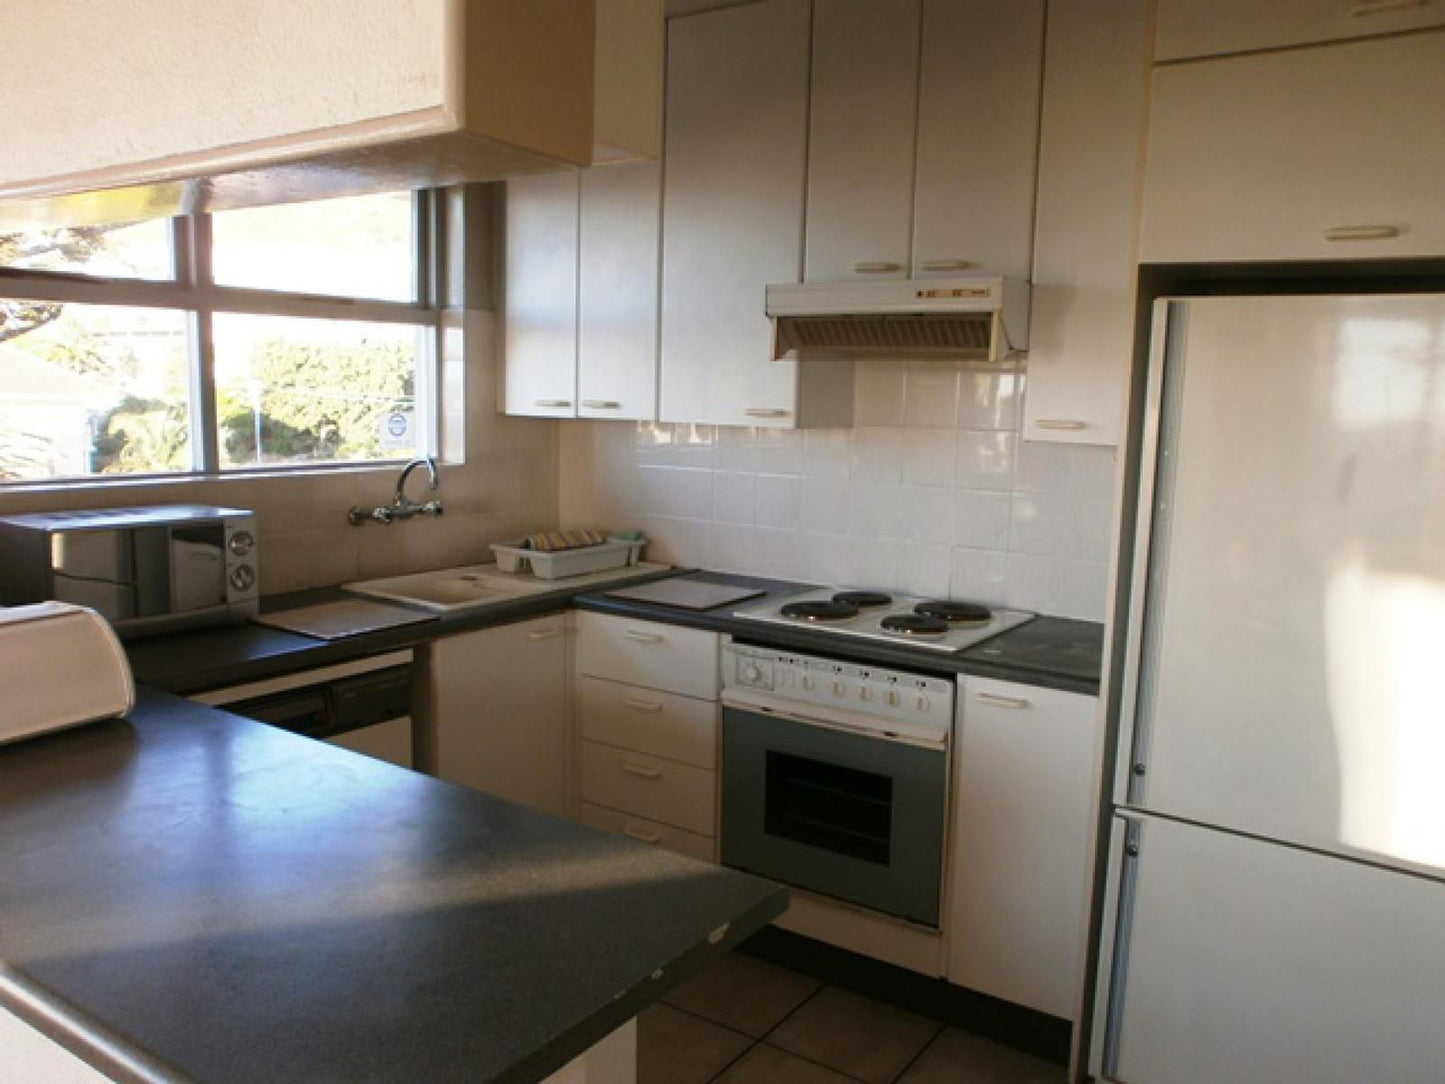 Glenlodge 2Bedroom Magnif View Apartment Sea Point Sea Point Cape Town Western Cape South Africa Kitchen